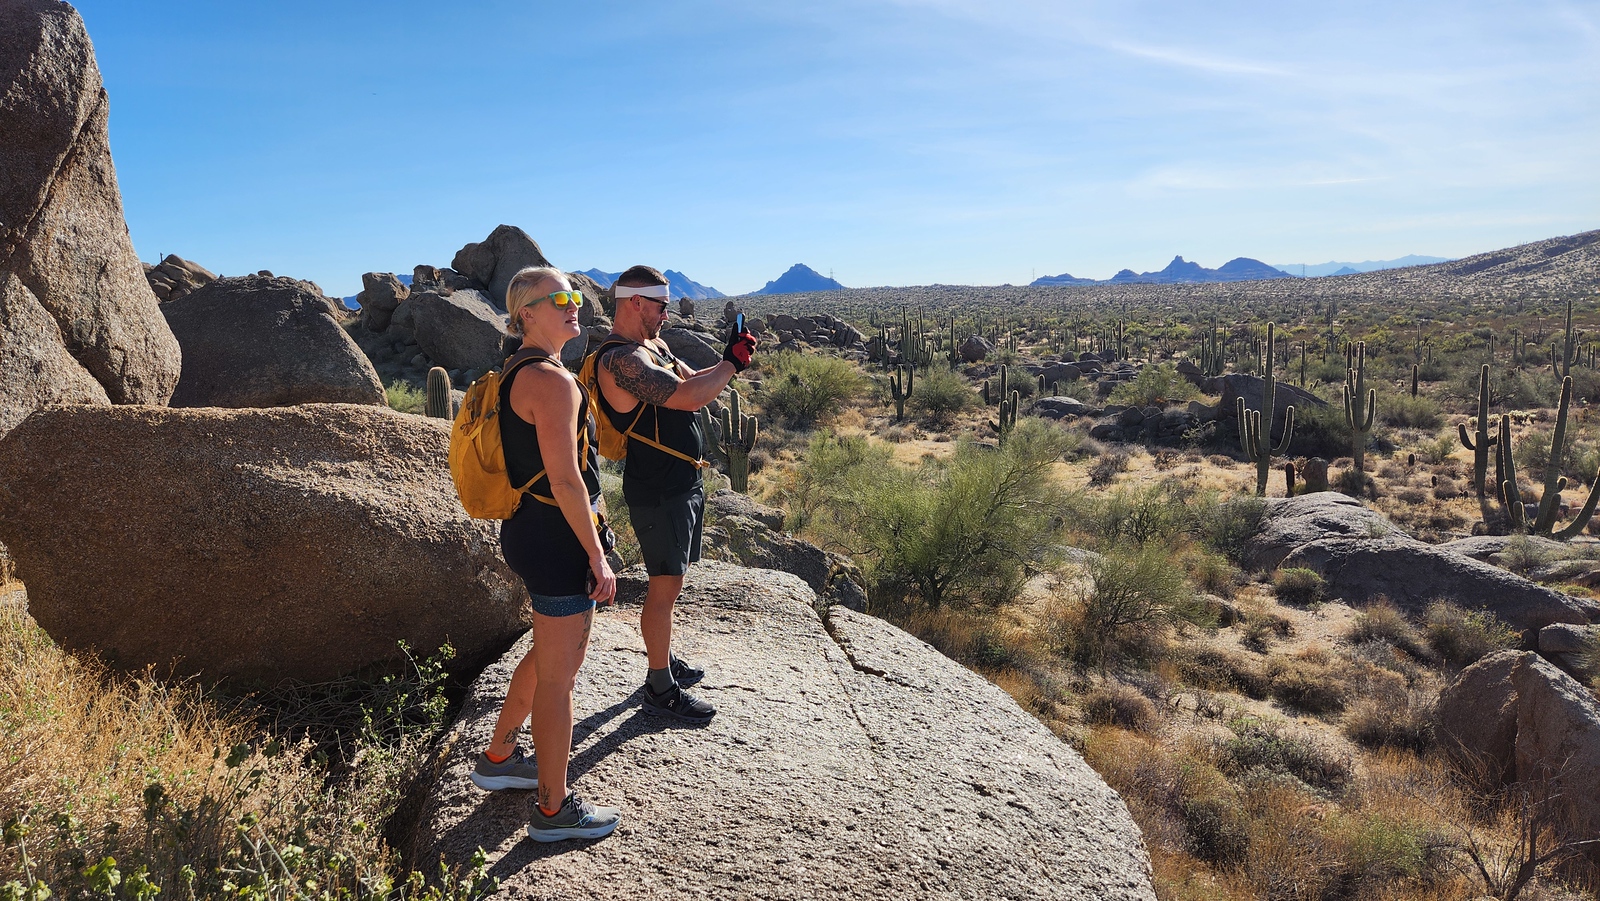 A couple pauses during one of the Wild Bunch's Phoenix hiking tours to take in the breathtaking scenery together.